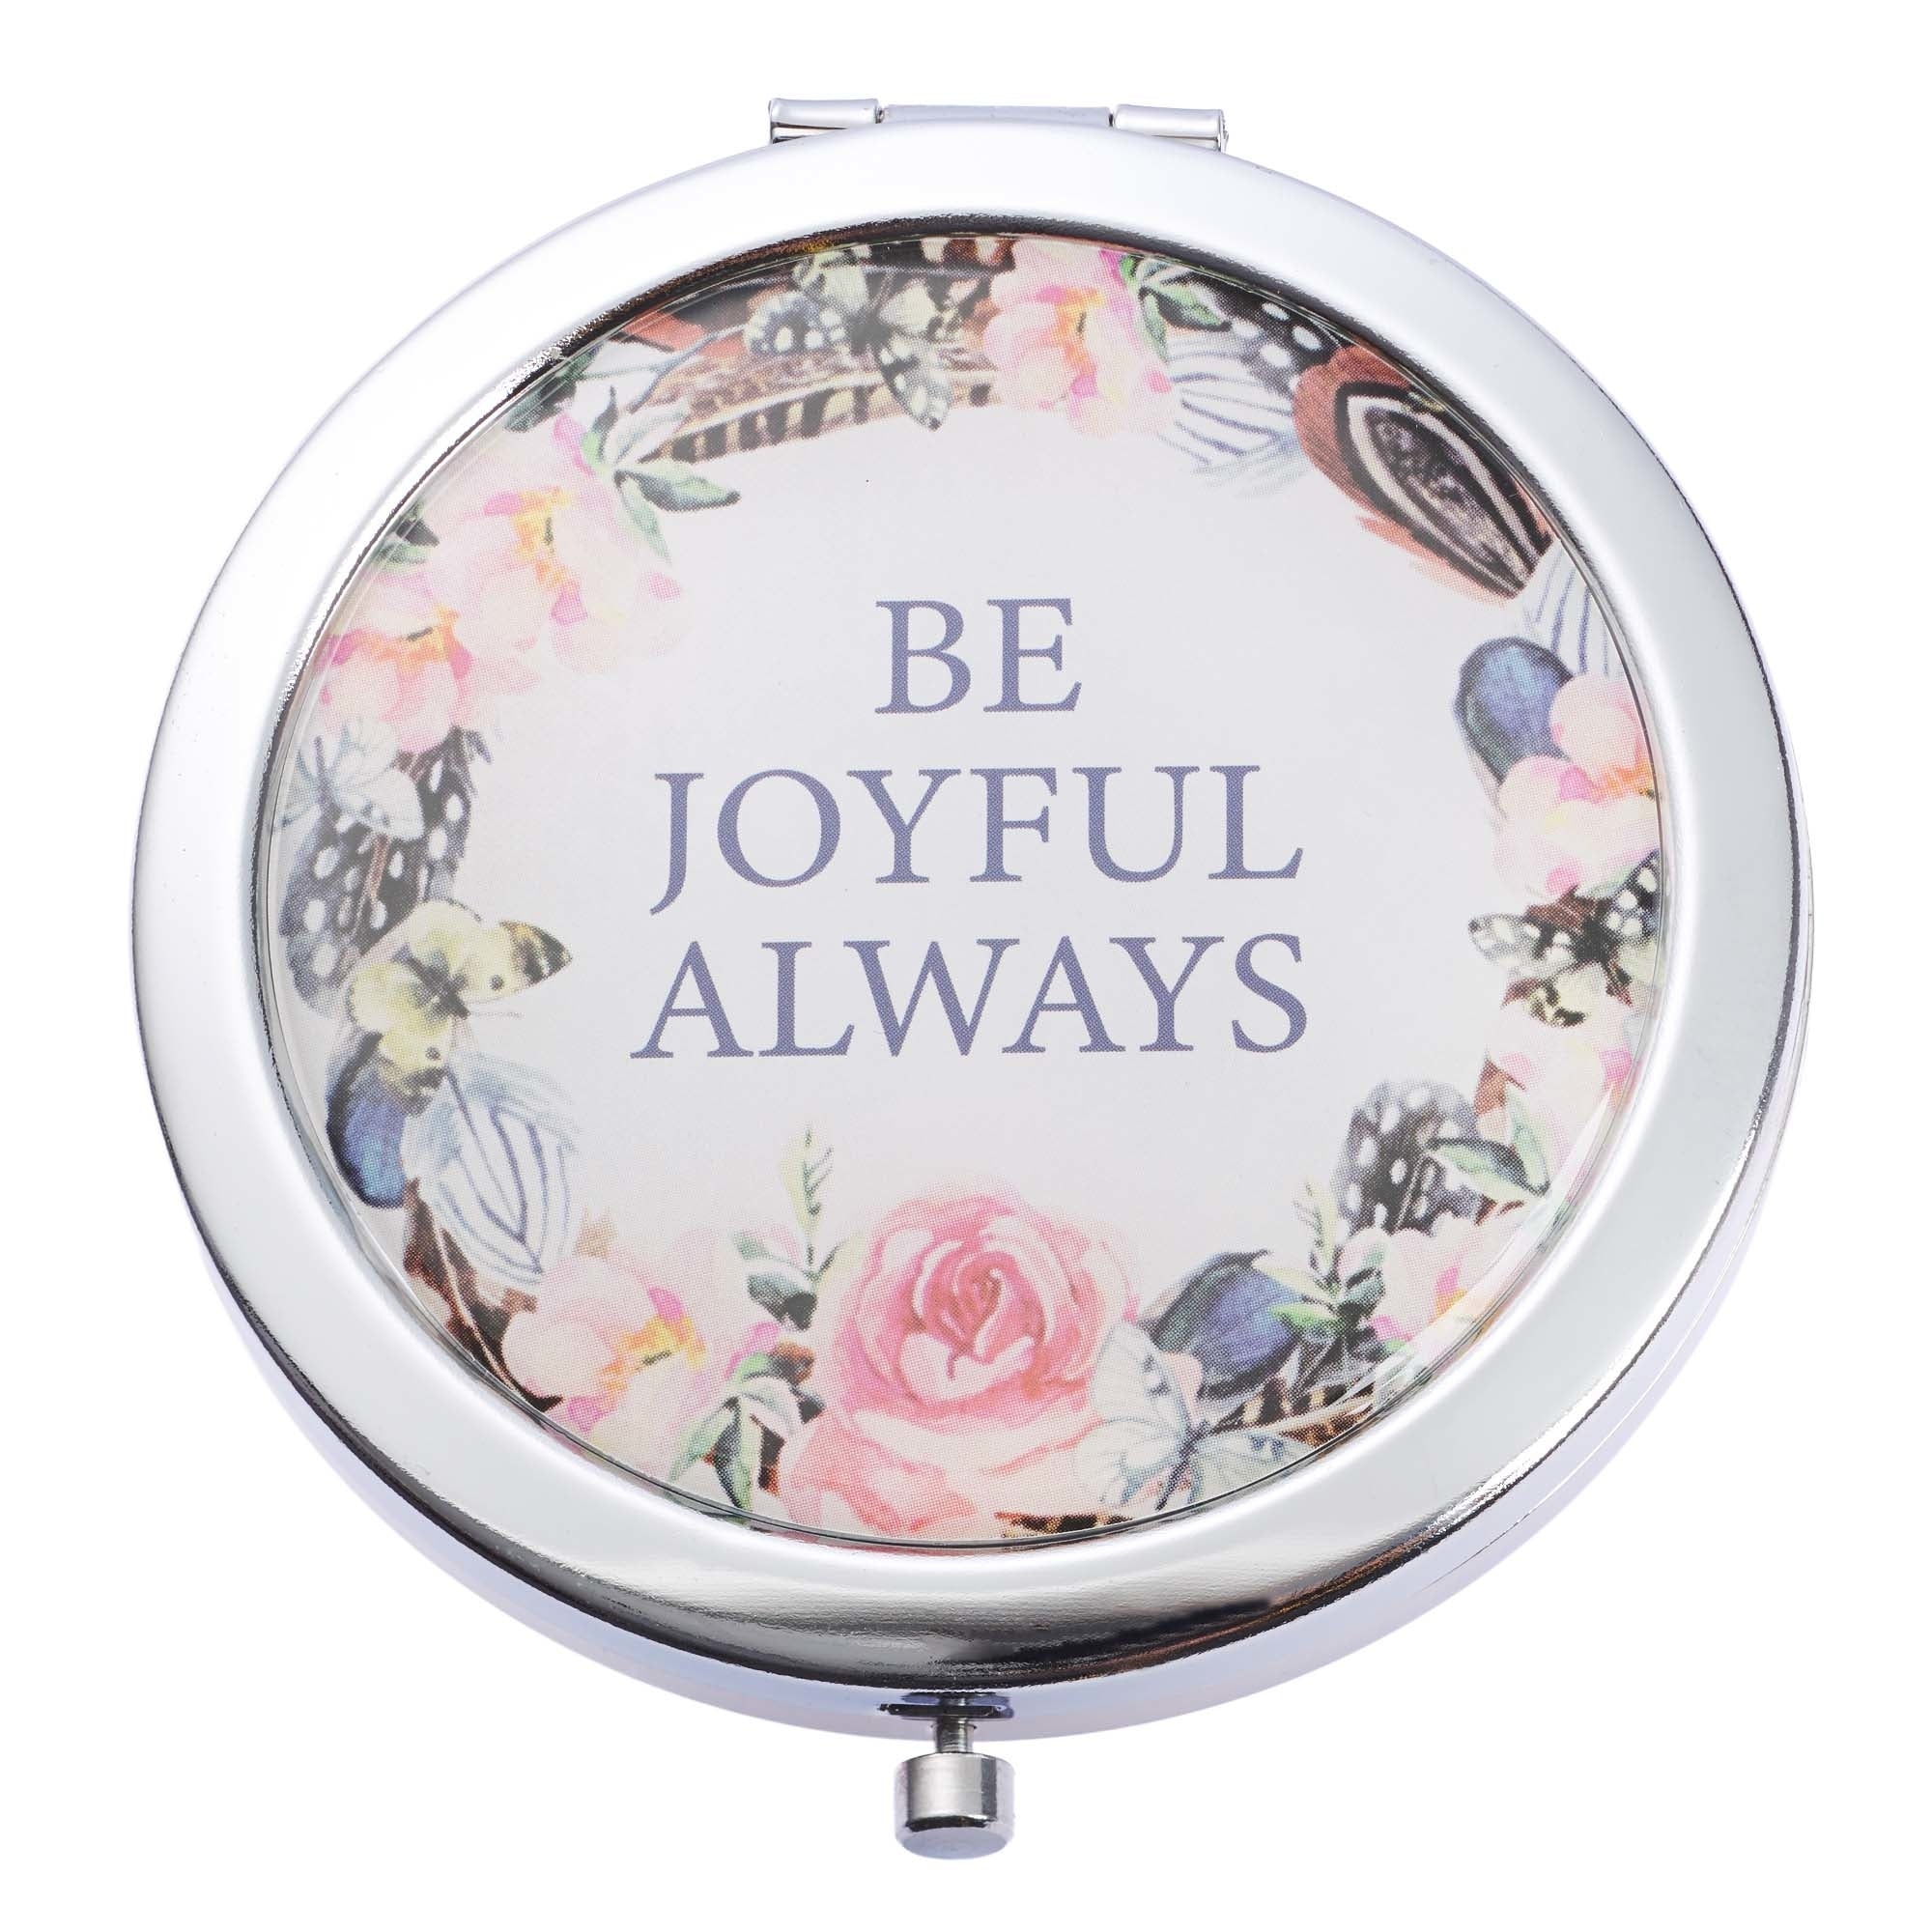 Image of Be Joyful Always Compact Mirror in White other